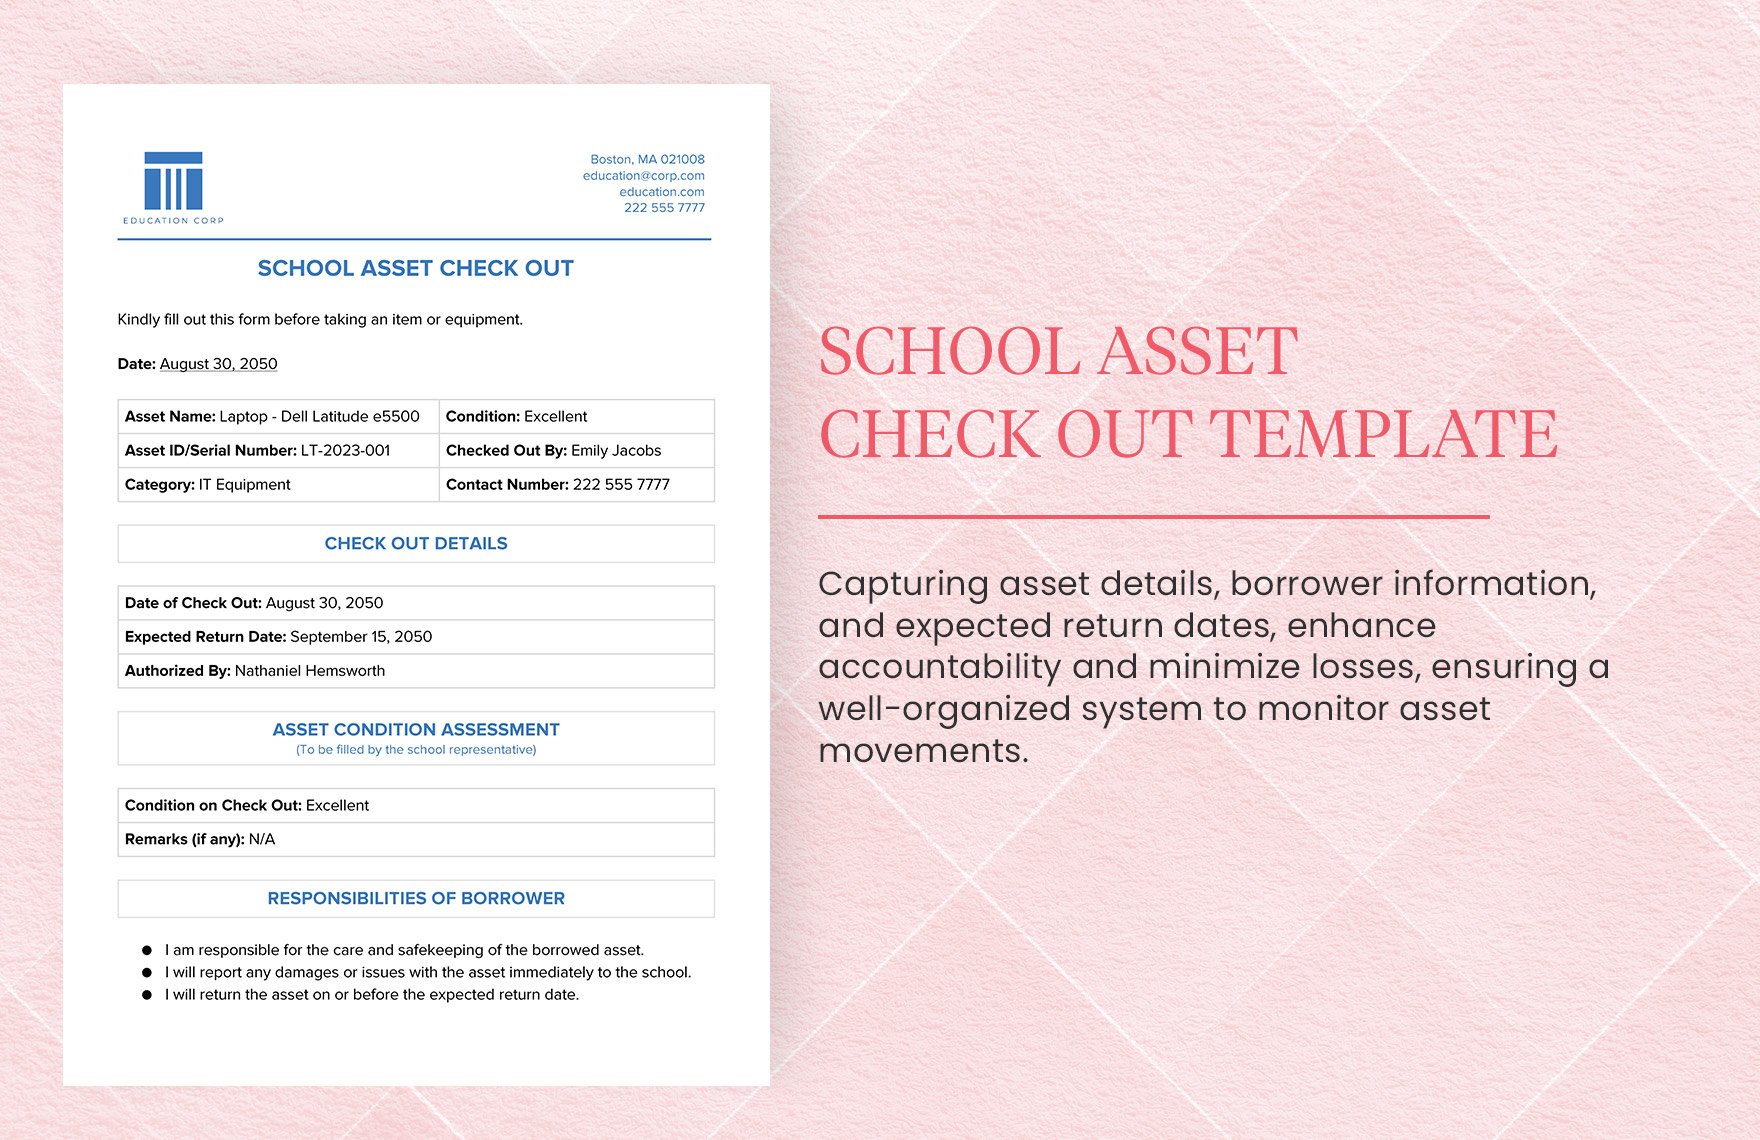 School Asset Check Out Template in Word, Google Docs, PDF